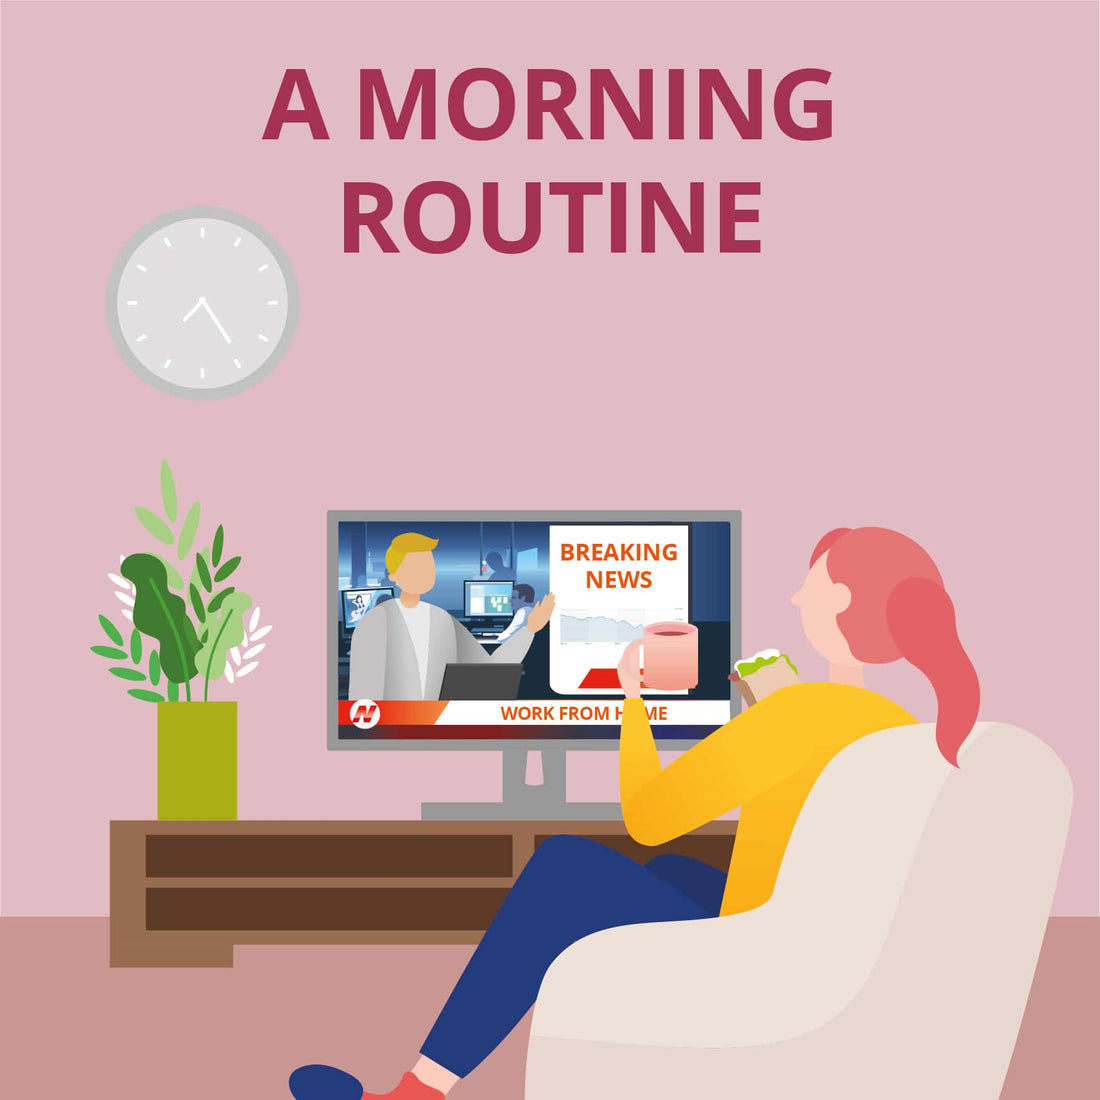 15 Tips To Help You Structure a Productive Morning Routine